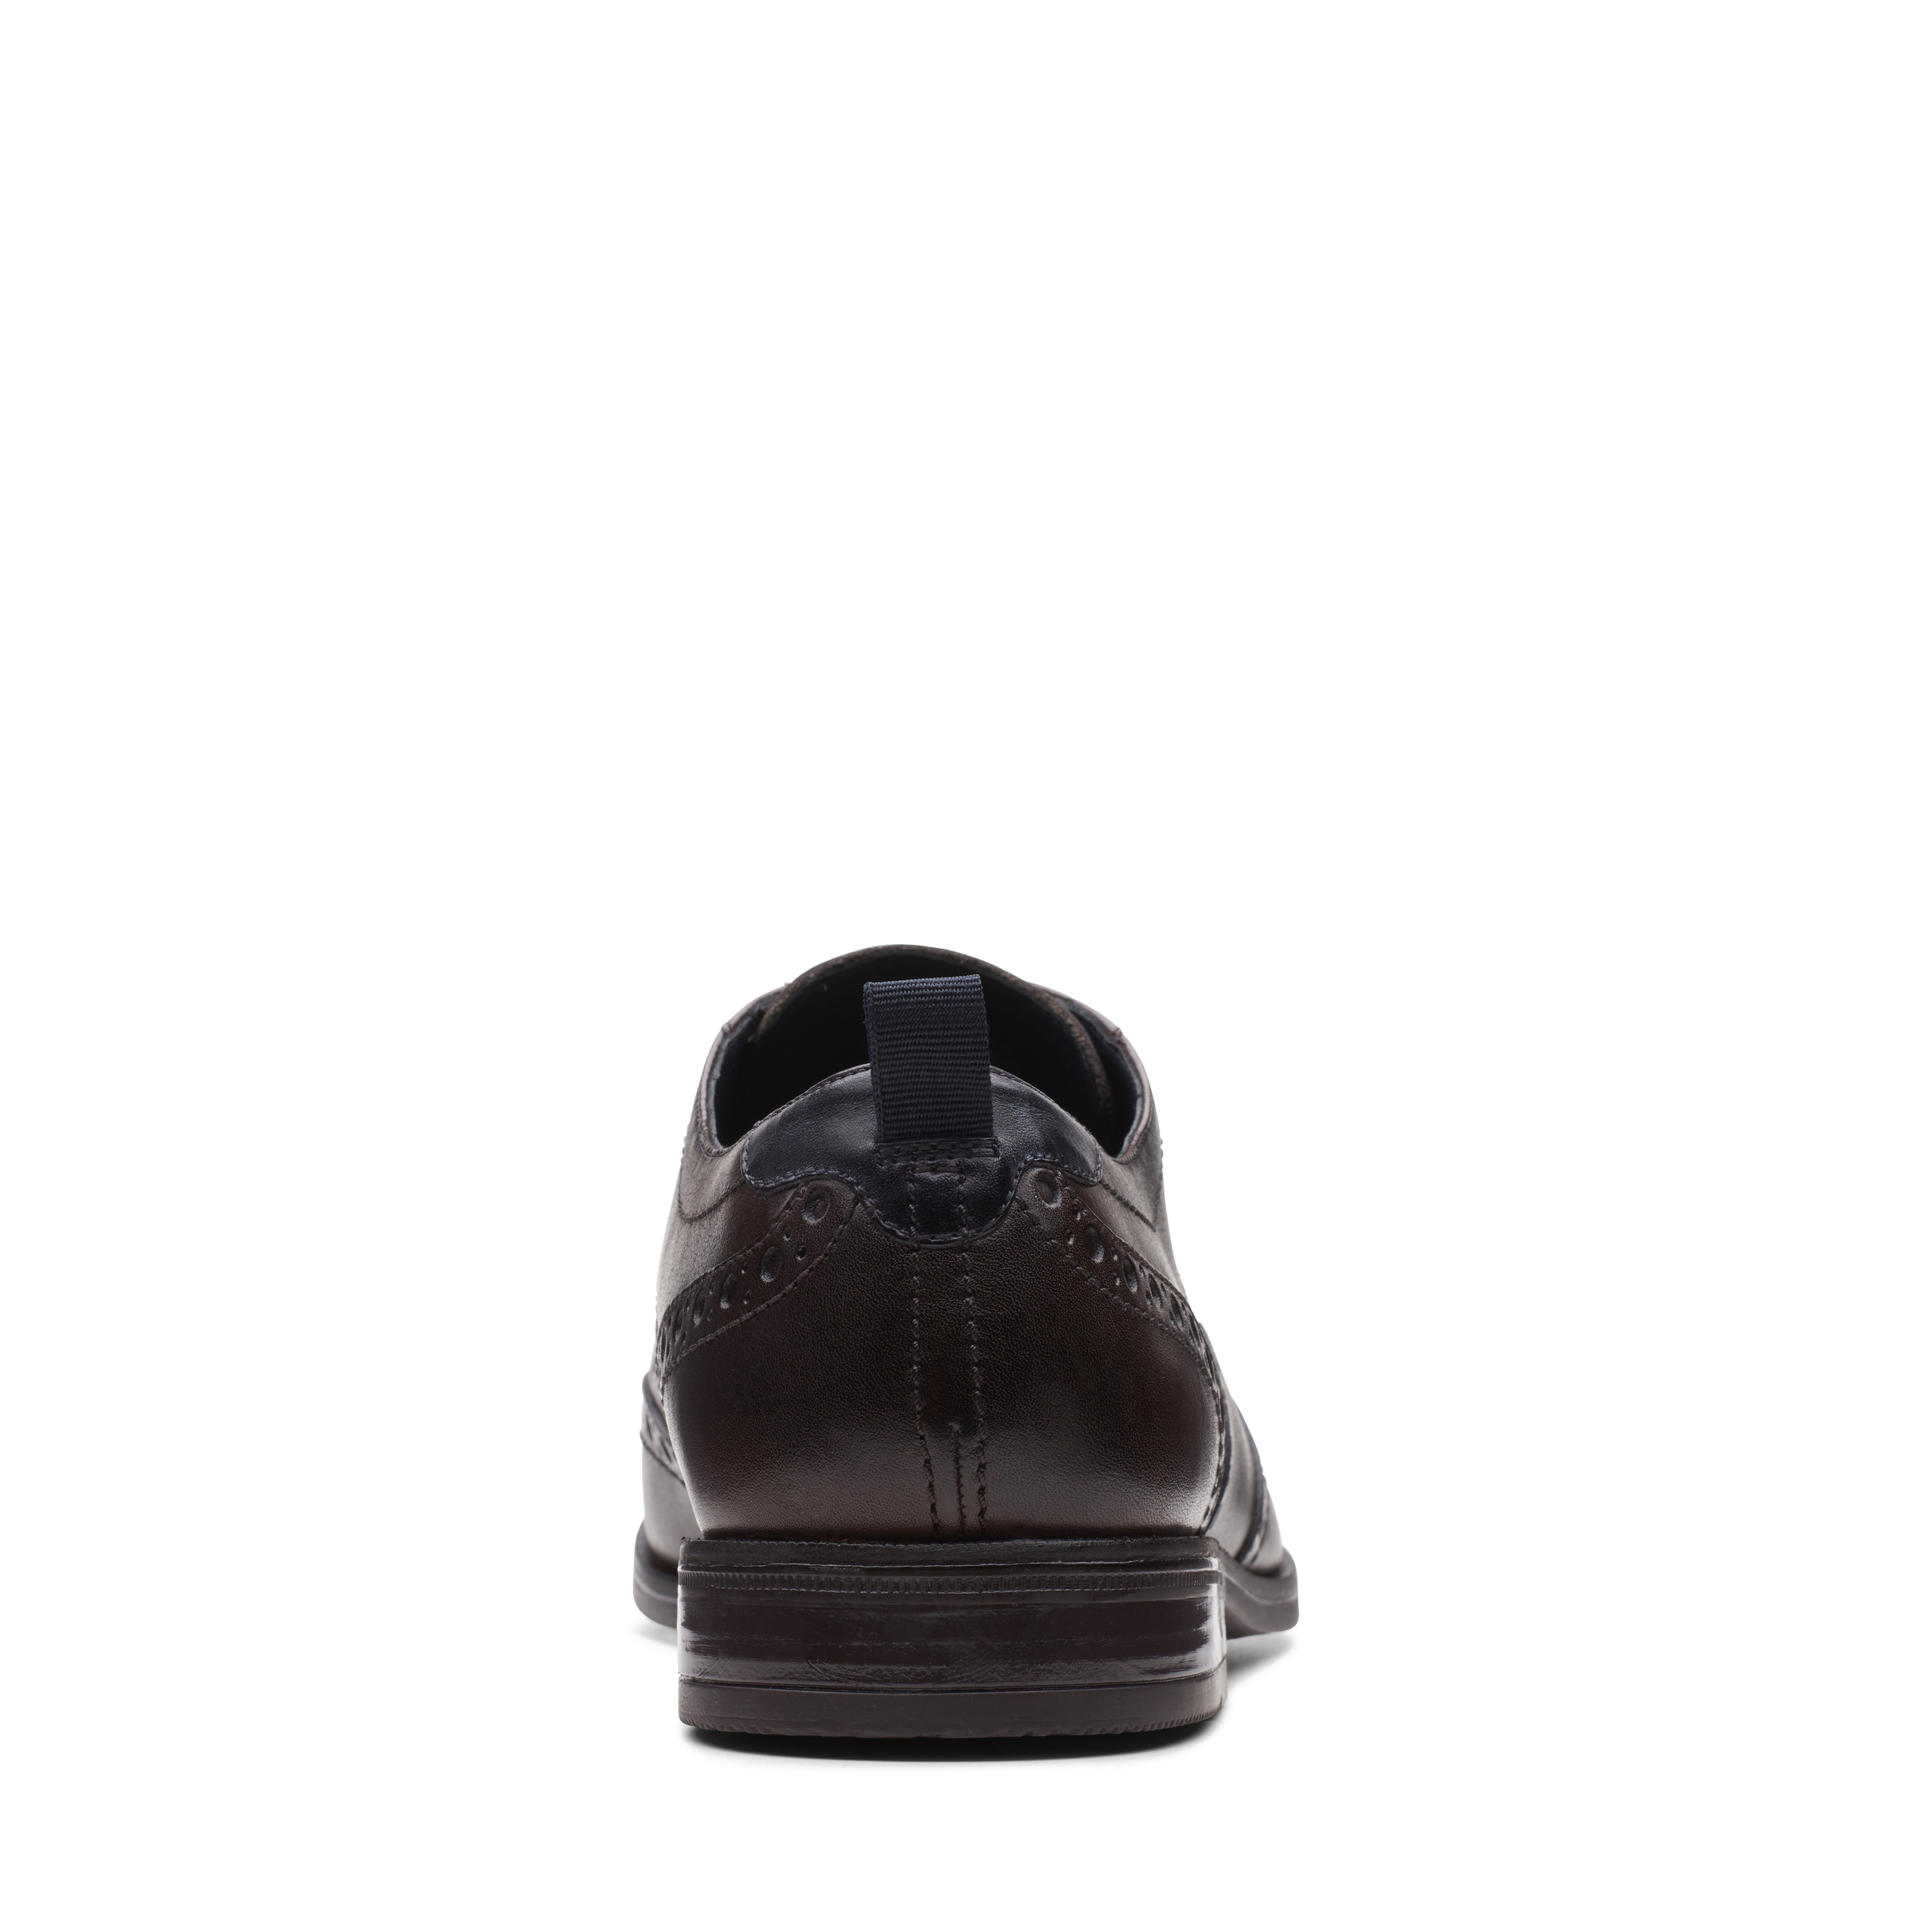 Clarks | Men's Brown Leather Formal Lace-ups 5